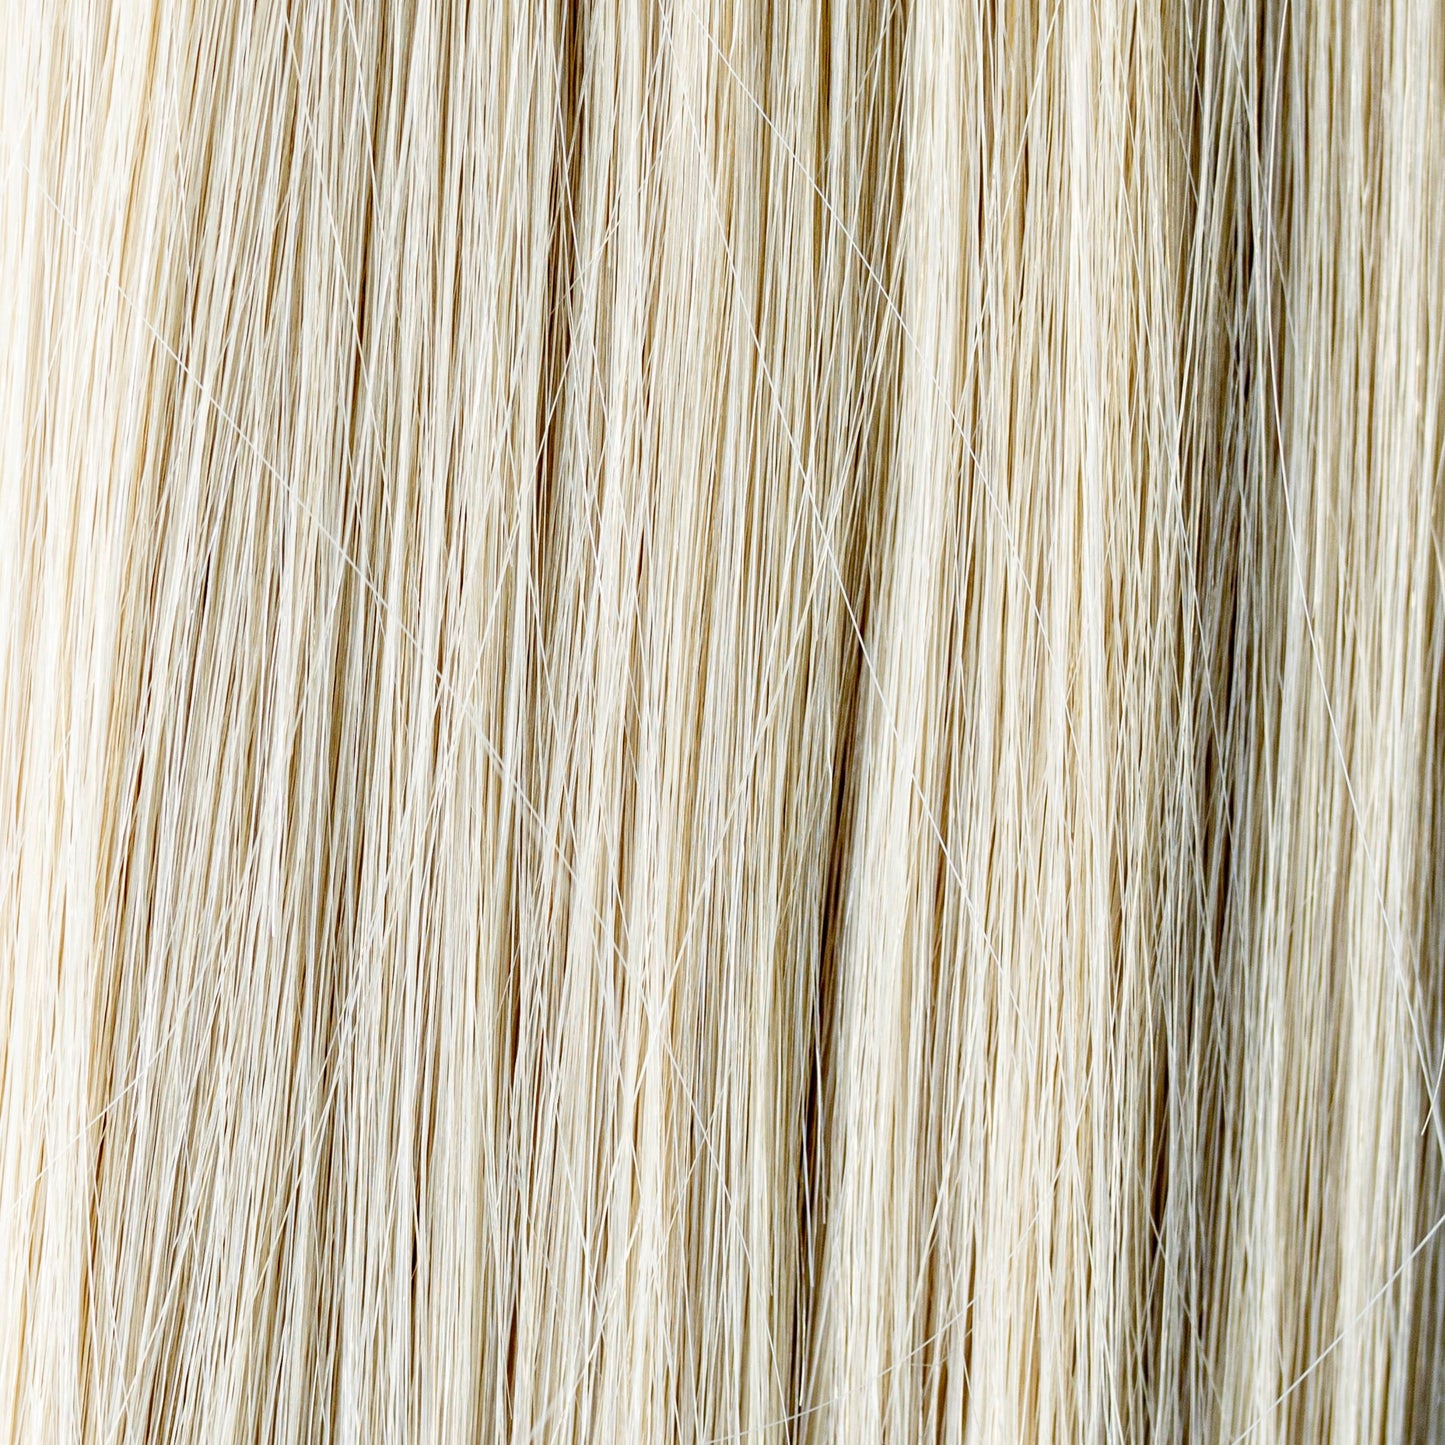 Madeline | Strong Strands Hand-Tied Extensions